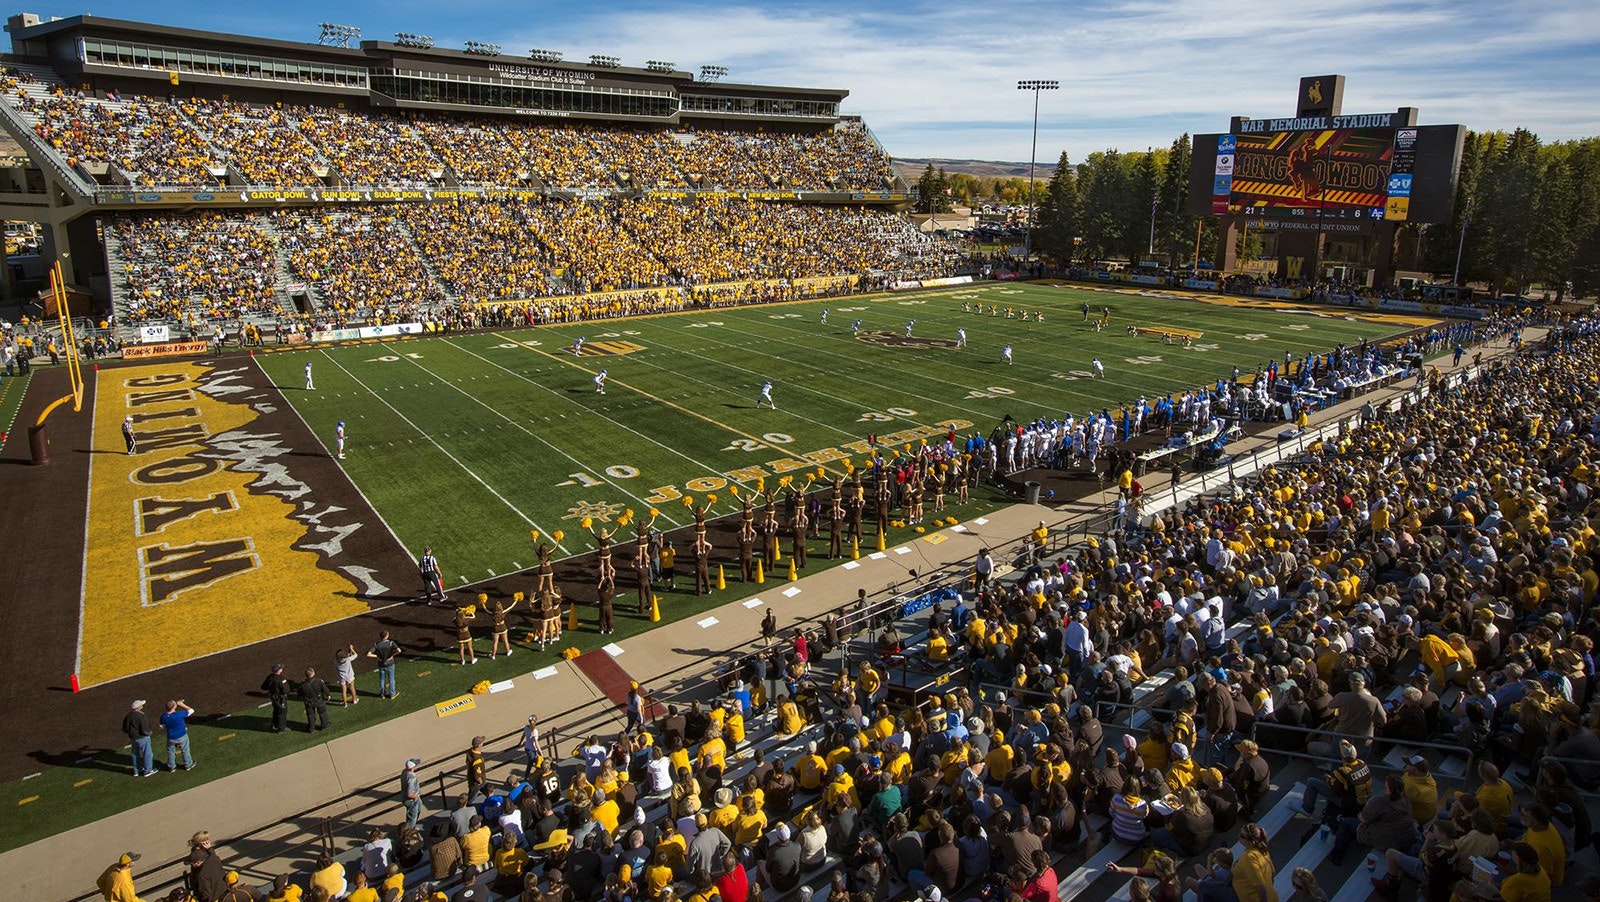 Wyoming's high school football championship games are all played at War Memorial Stadium on the University of Wyoming campus in Laramie.